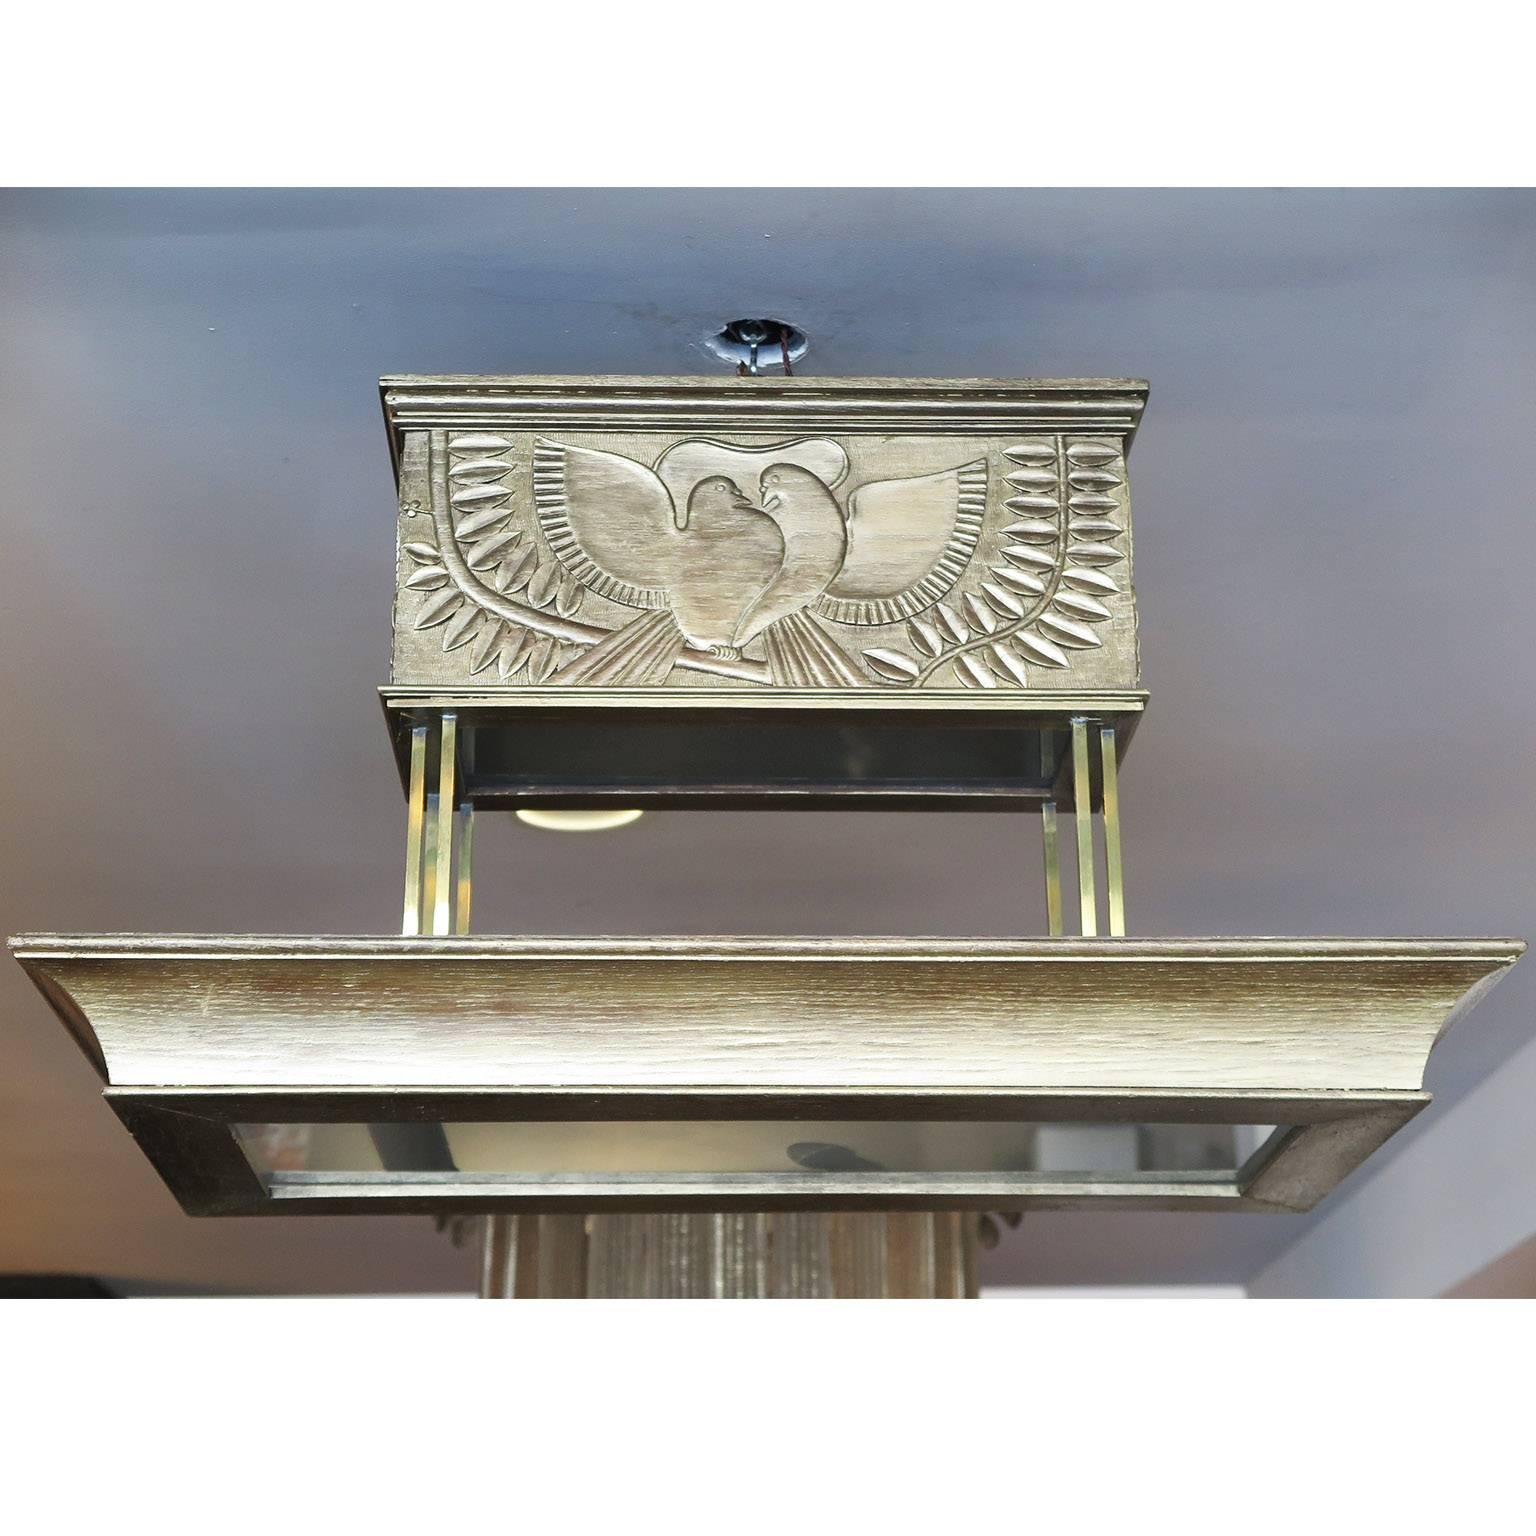 Rectangular wooden chandelier with bas relief doves and palms with a white-gold finish. Frosted glass panes and thin brass rods. In the style of Petitot. Four candelabra bulbs inside.